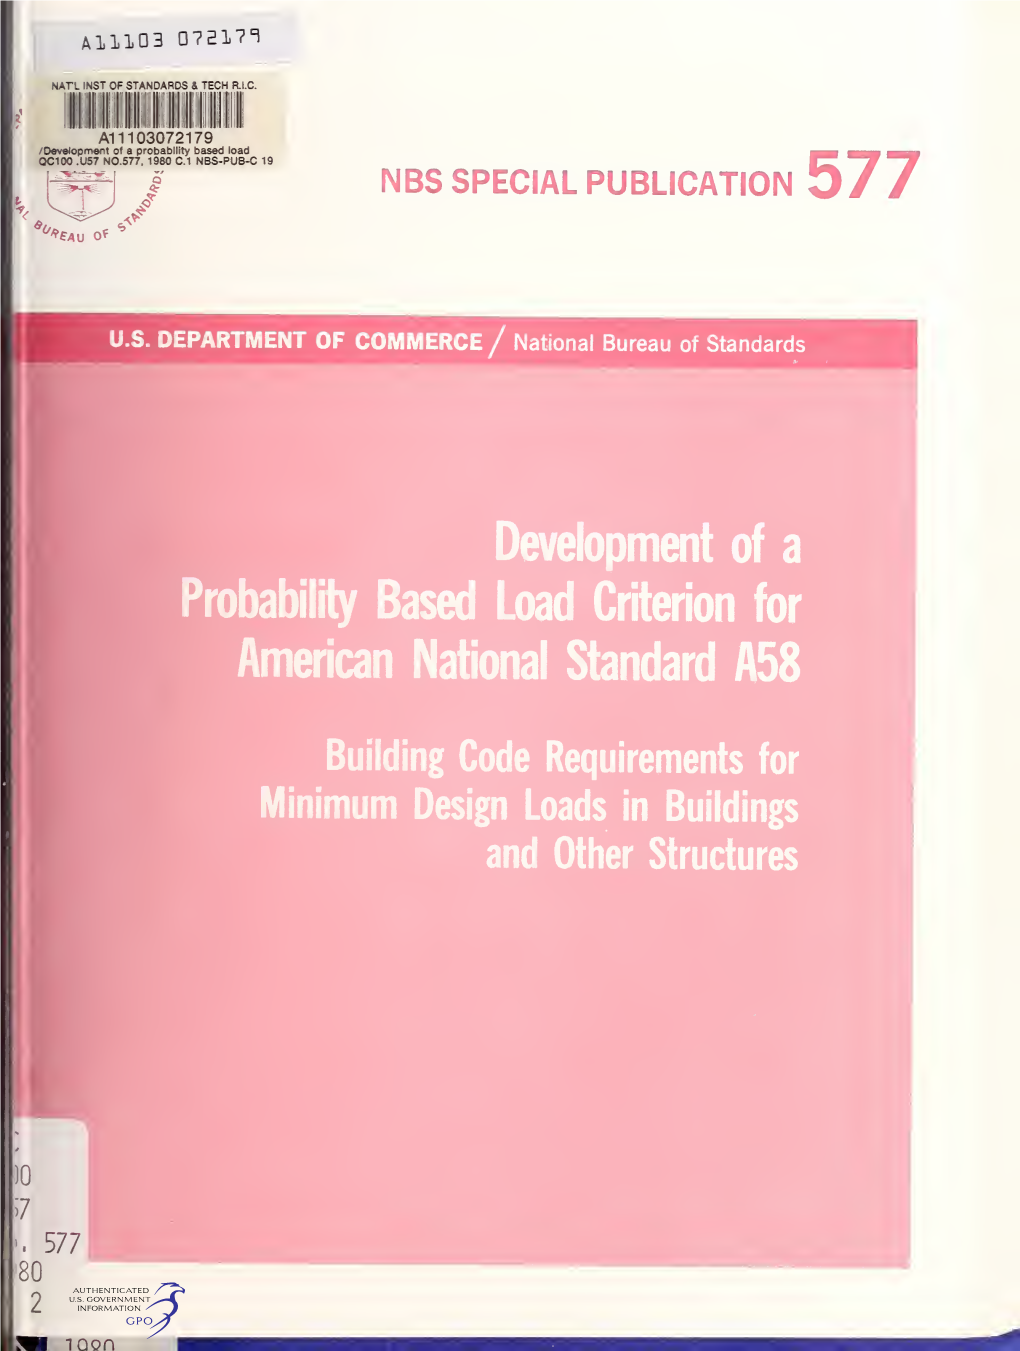 Development of a Probability Based Load Criterion for American National